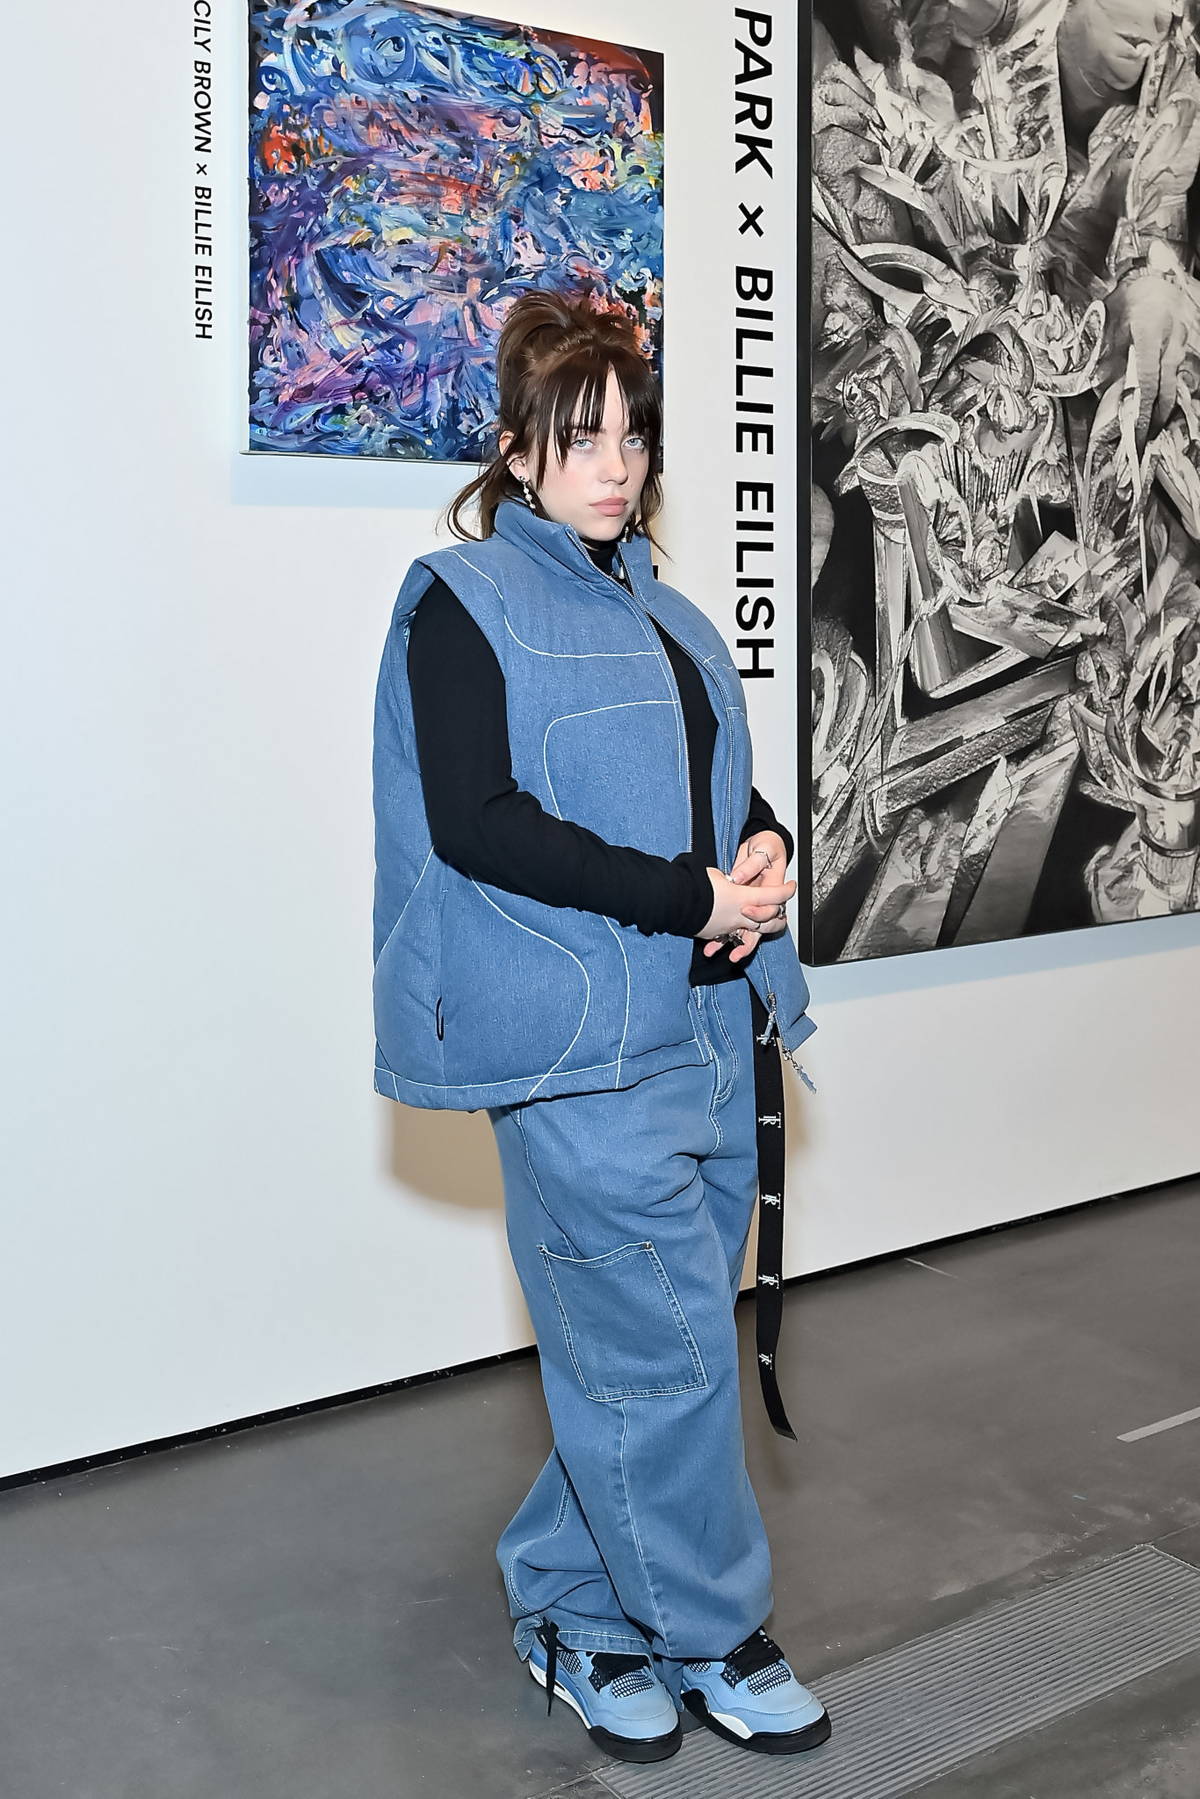 Billie Eilish attends the 'Artists Inspired by Music: Interscope Reimagined' Art Exhibit in Los Angeles